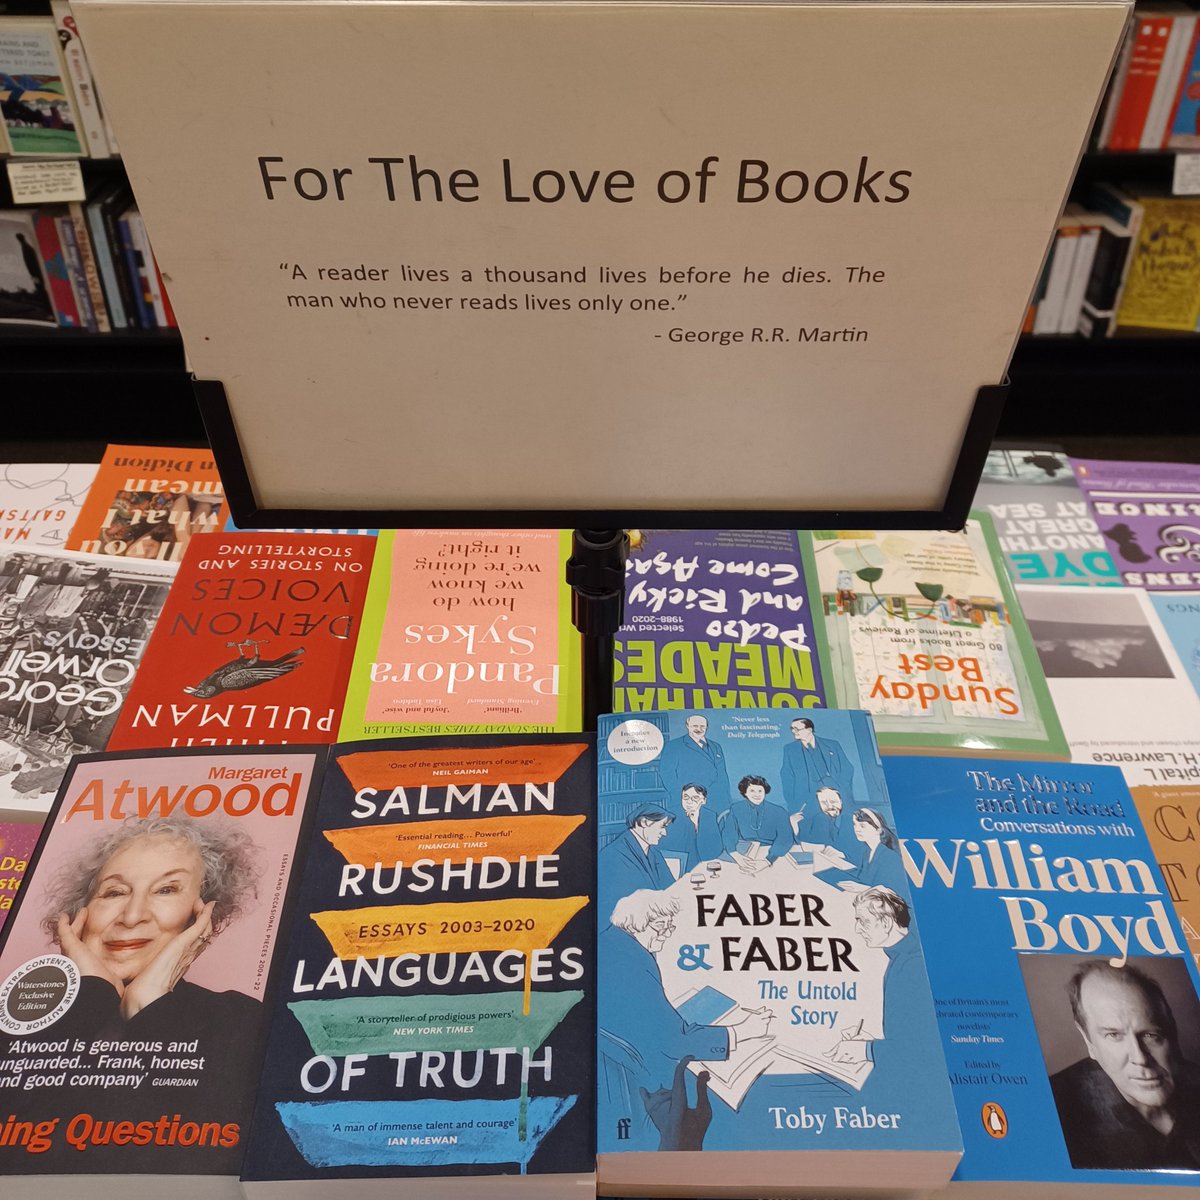 I'm never quite sure where - or whether - I'll find my Q&A books in bookshops, so it's great to see #TheMirrorAndTheRoad displayed in two different sections @Waterstones Piccadilly: Biography and Literary Criticism. #BoydWatching